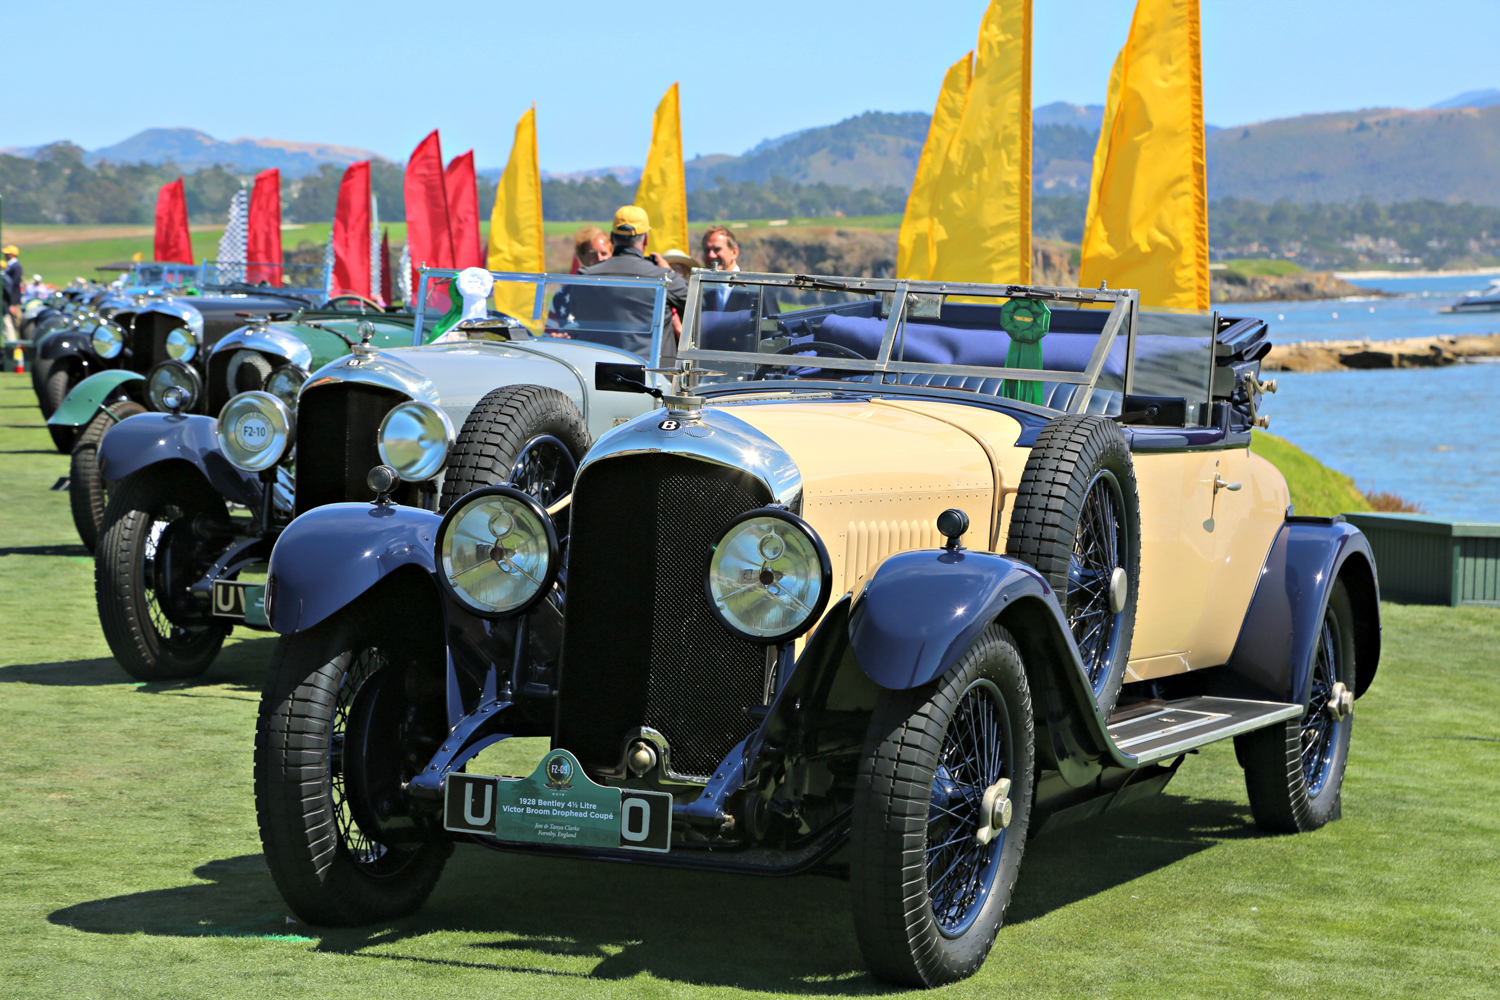 A 1928 Bentley 4 1/4 Litre Victor Broom Crophead Coupe owned by Jim & Tanya Clarke leads an impressive line of Bentley automobiles to celebrate the 100th anniversary of the marque.